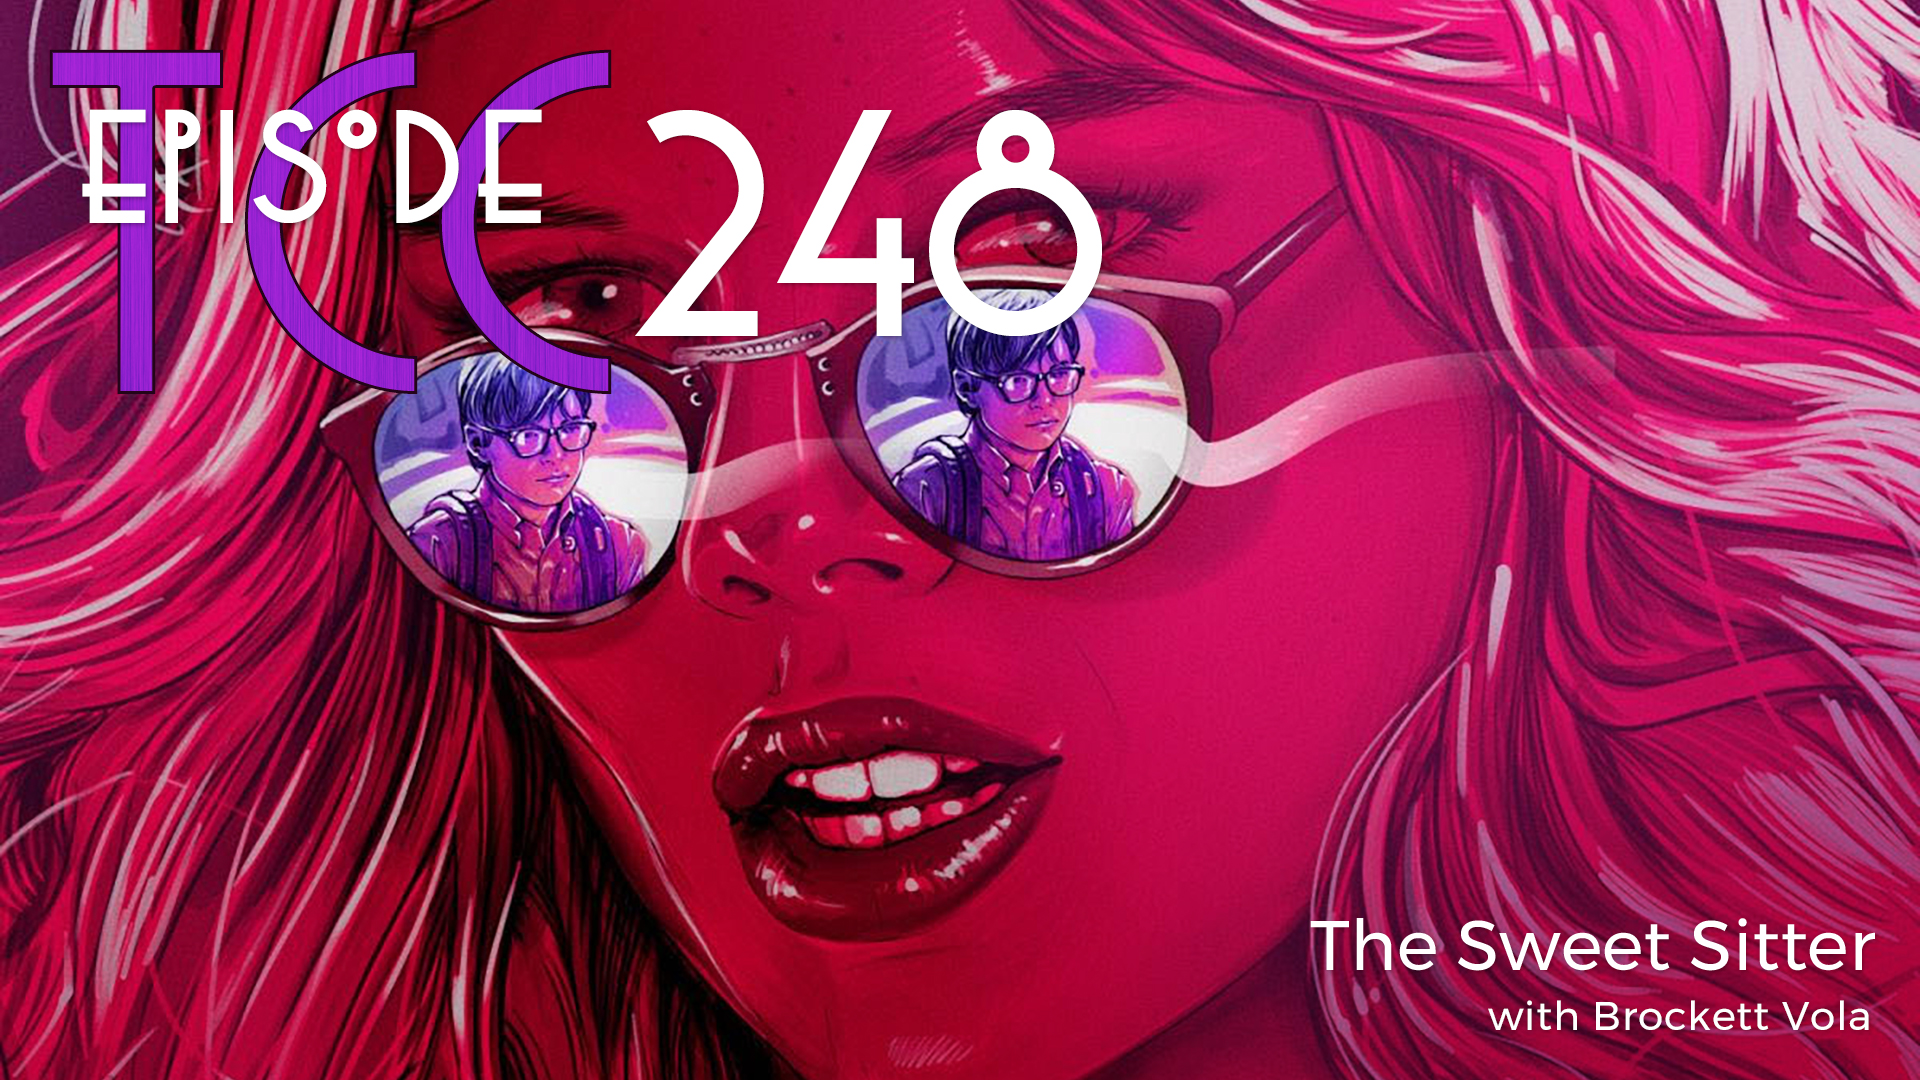 The Citadel Cafe 248: The Sweet Sitter